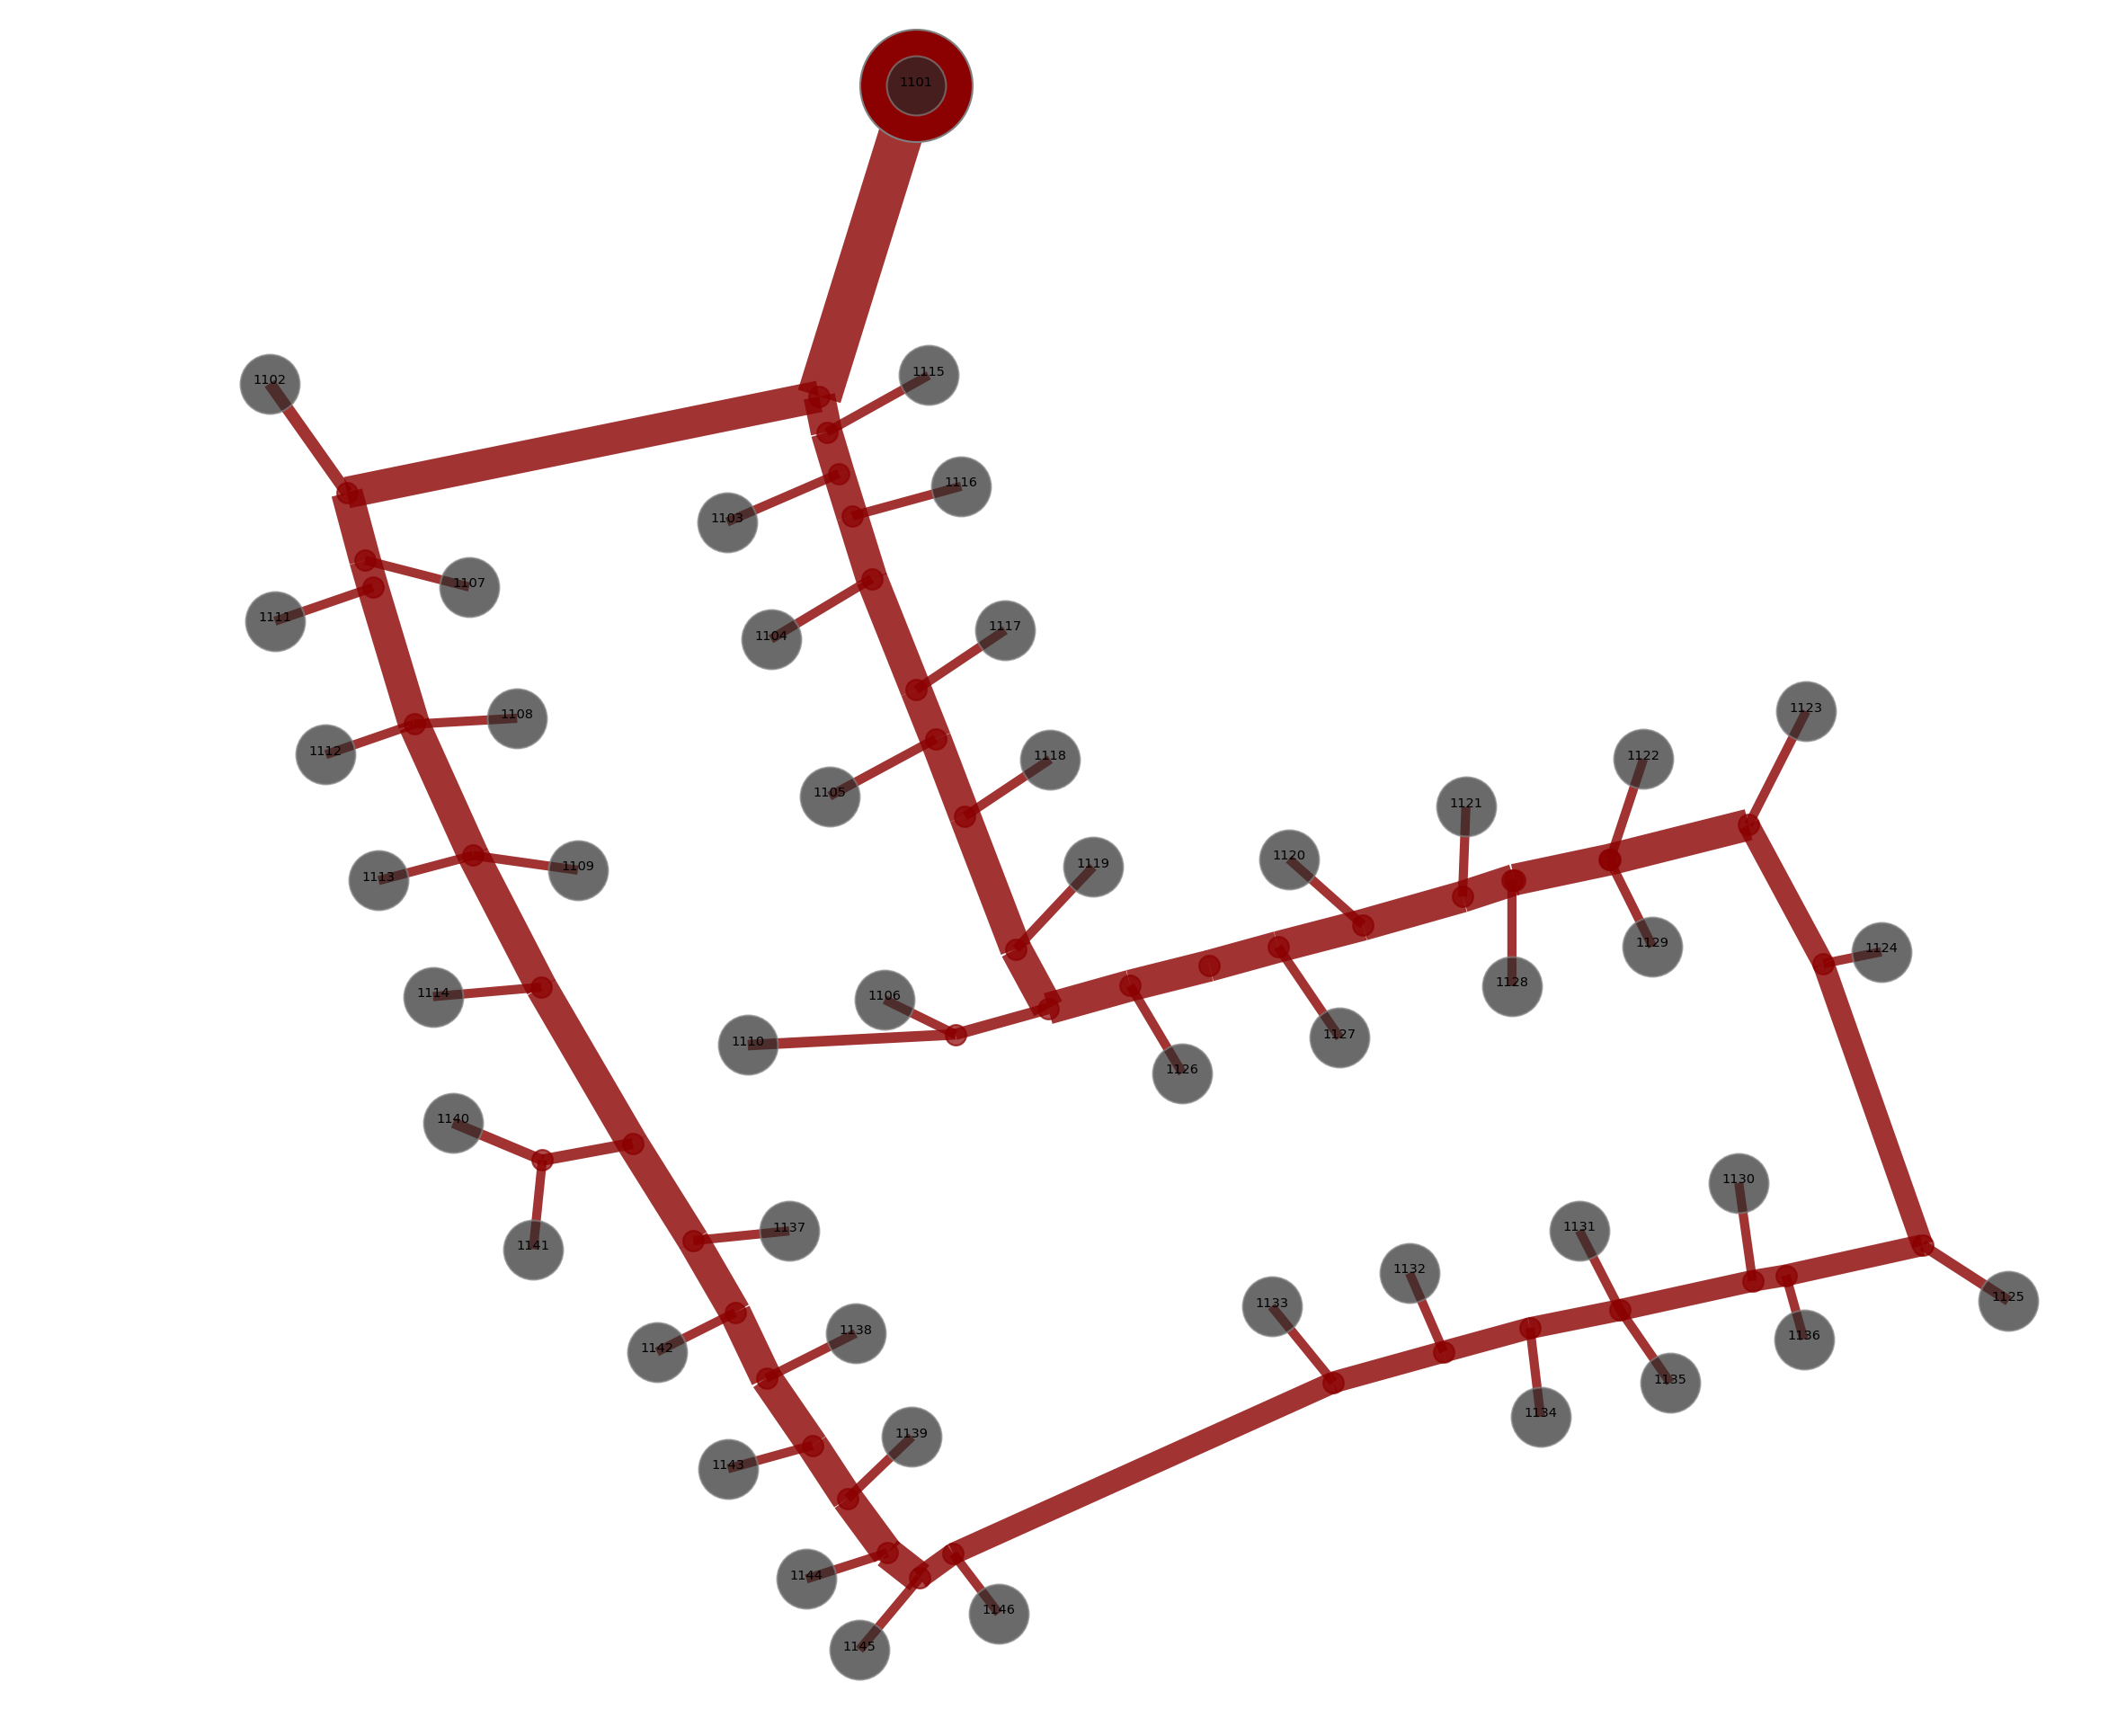 Layout of the LTN network created with uesgraphs